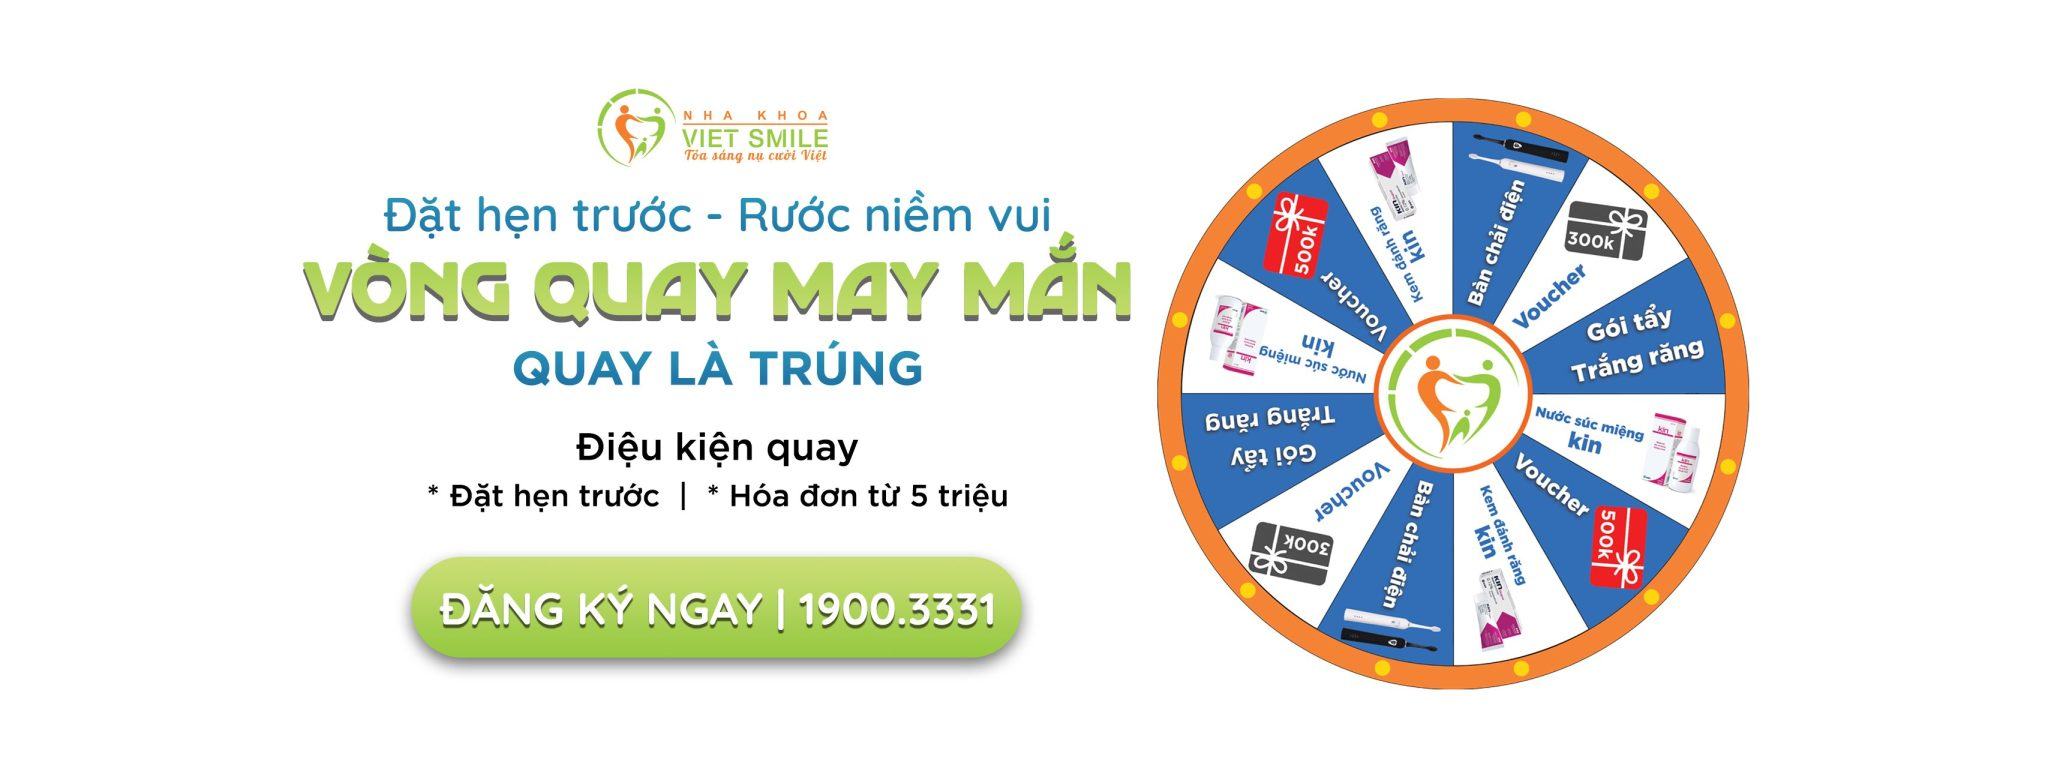 Vietsmile web vong quay may man scaled